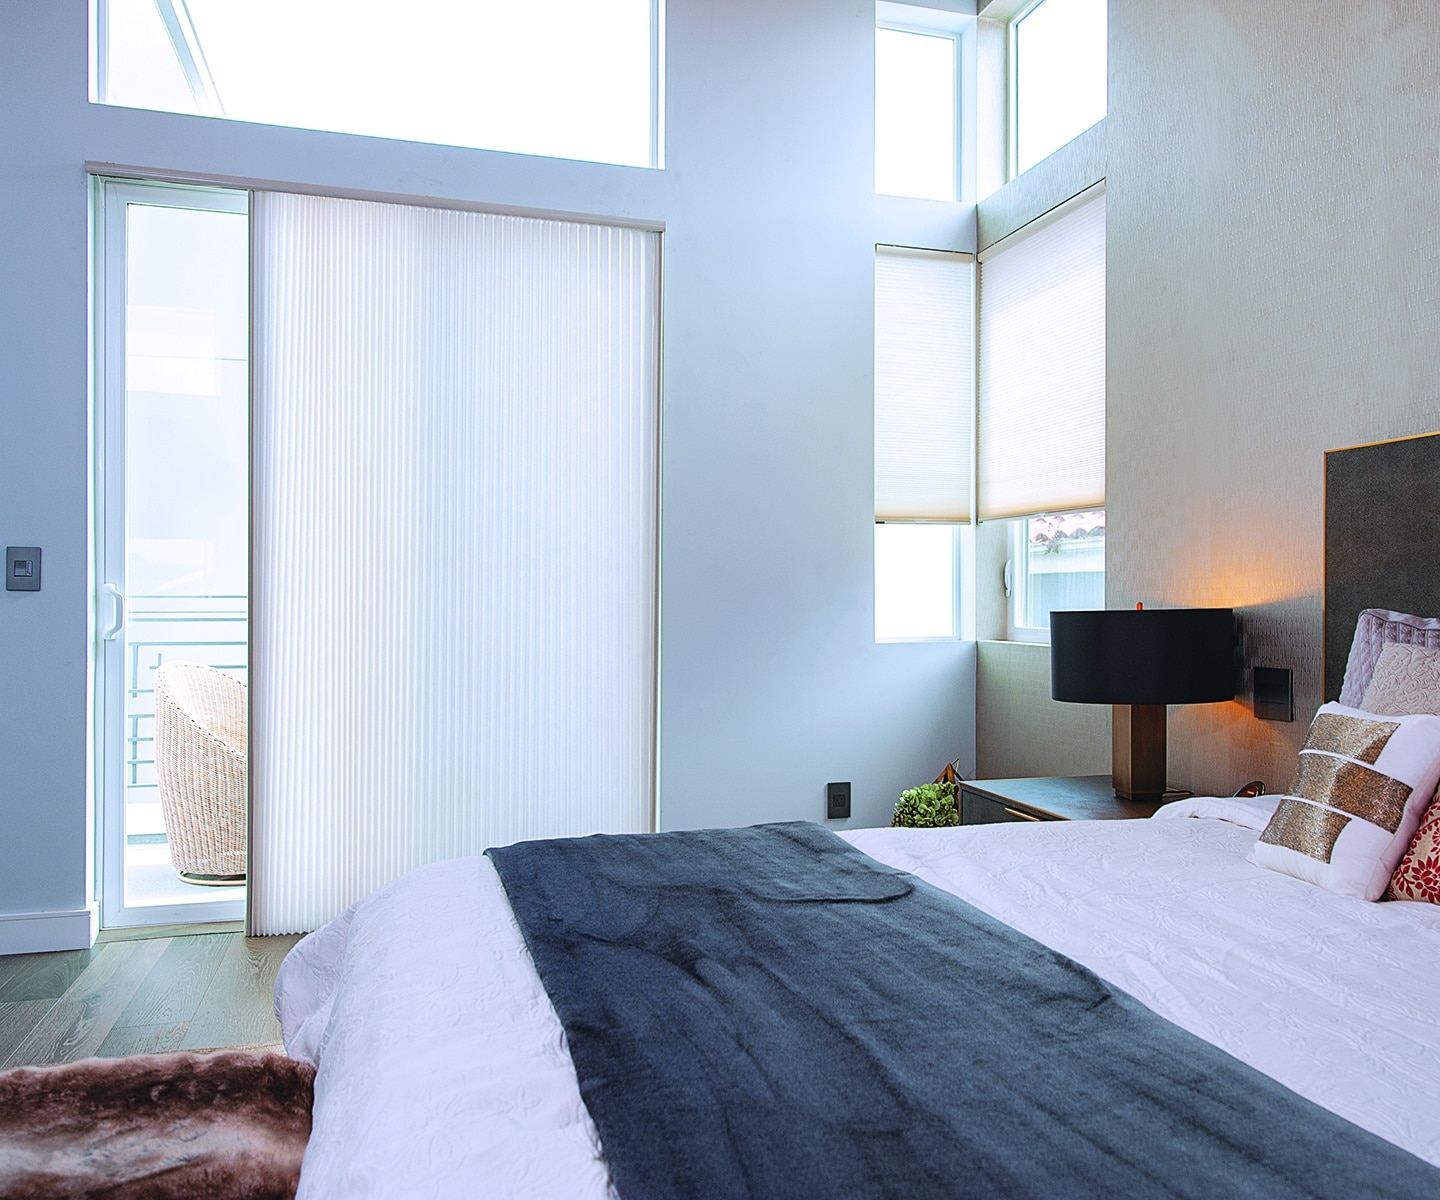 In McLean, VA, a cozy bedroom with bright, honeycomb shades with Sound Absorption Capabilities